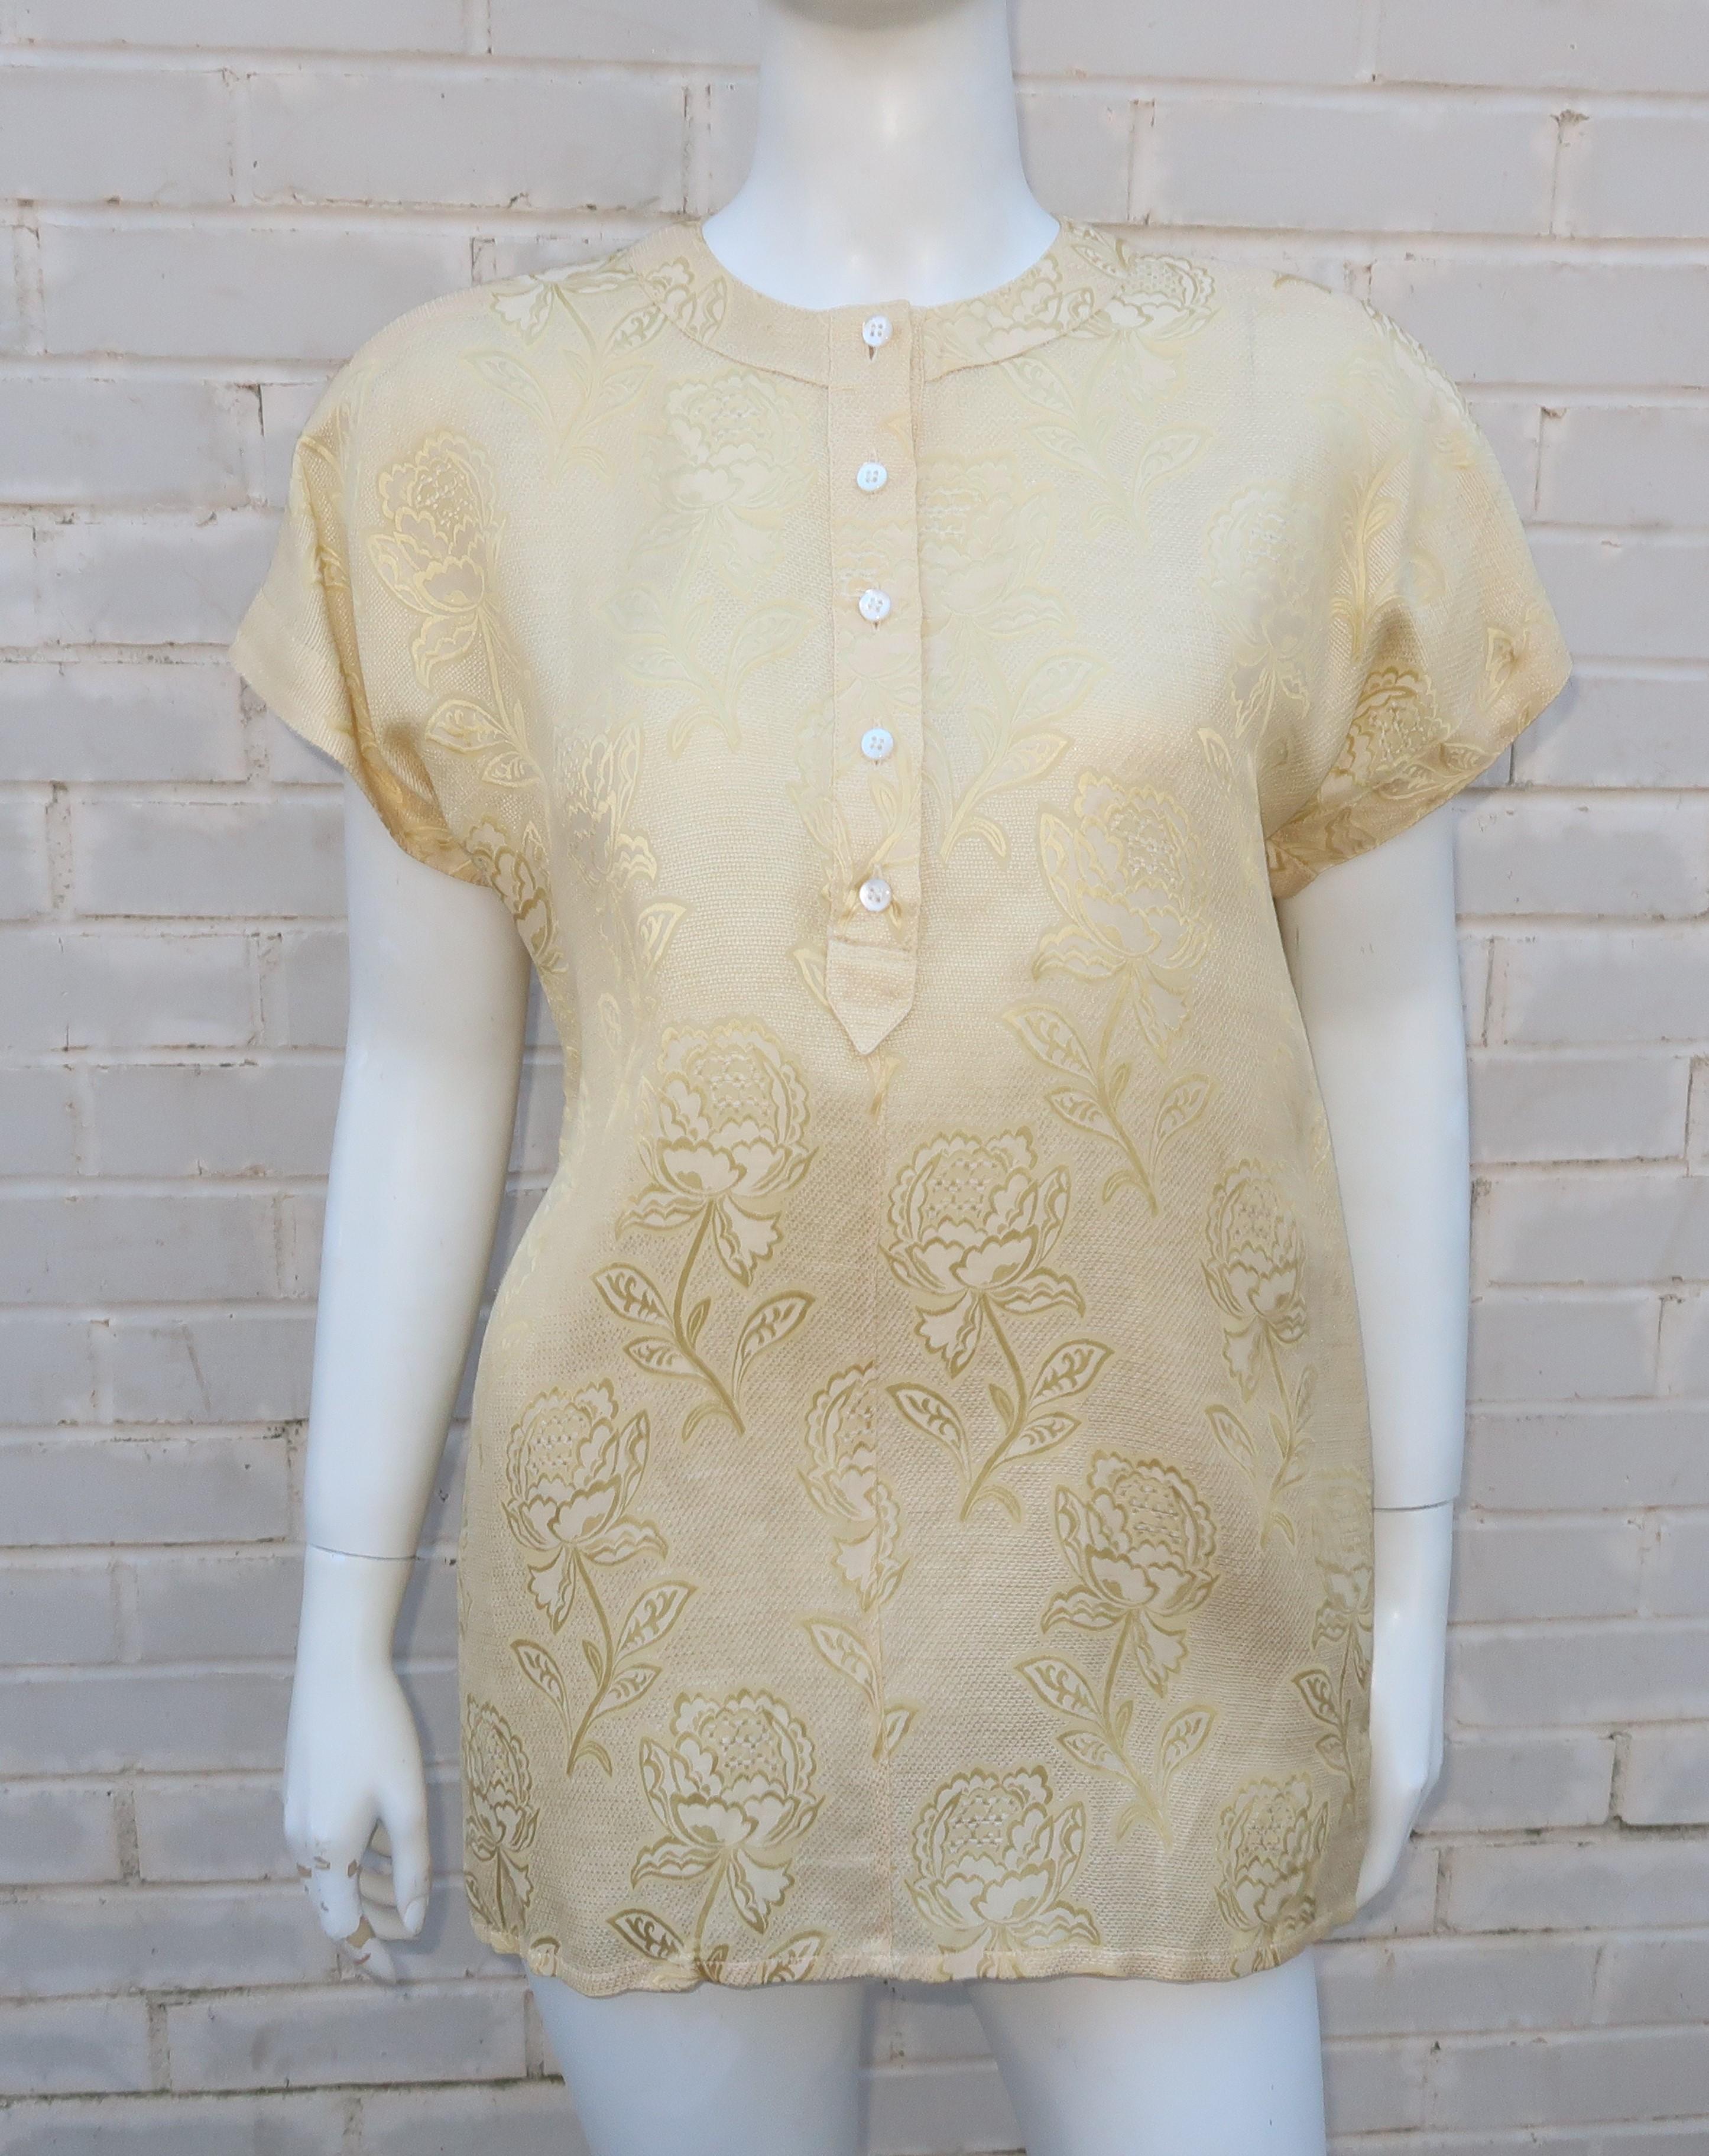 Spring is in the air with this Escada silk and linen blend jacquard top in a pale 'buttery' yellow shade that is the perfect foil for the floral design.  The easy pullover construction is accented by buttons and shaped by a light shoulder pad.  The